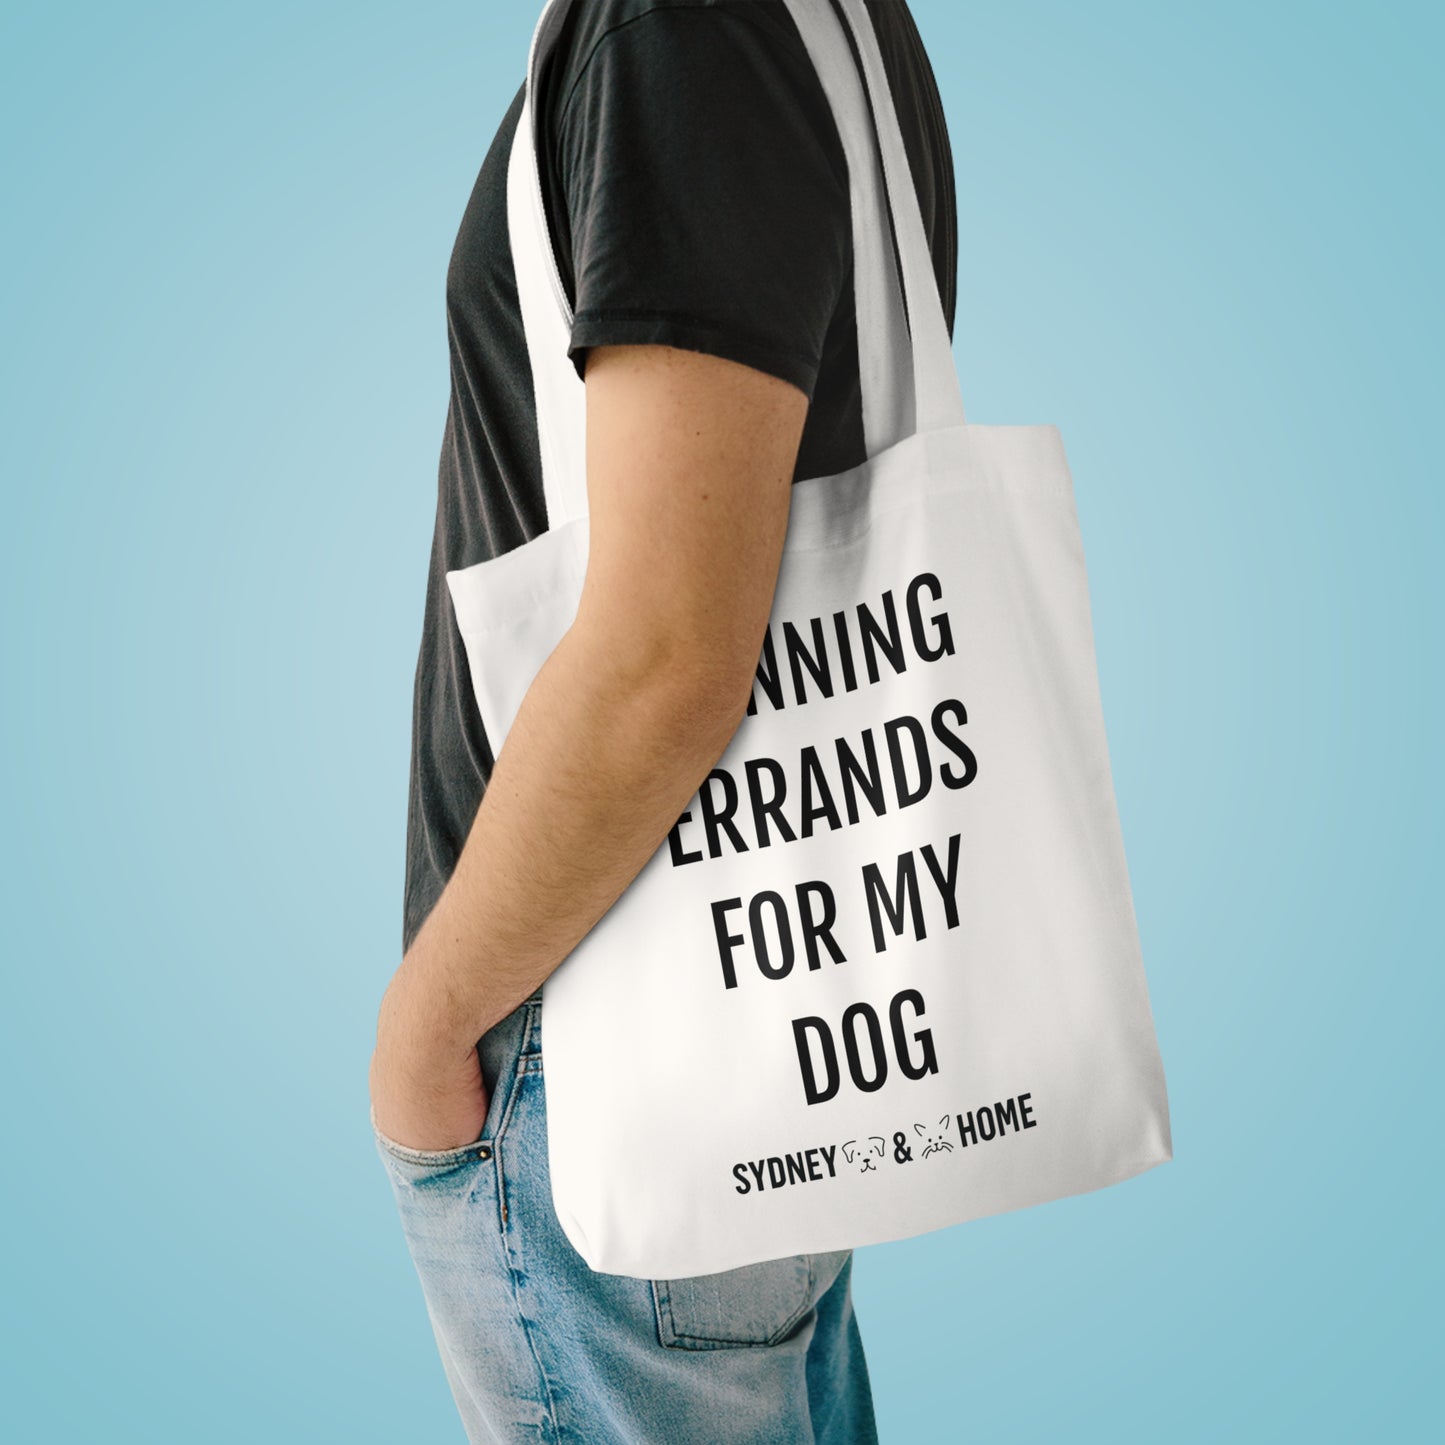 Tote Bag - Running Errands for my Dog